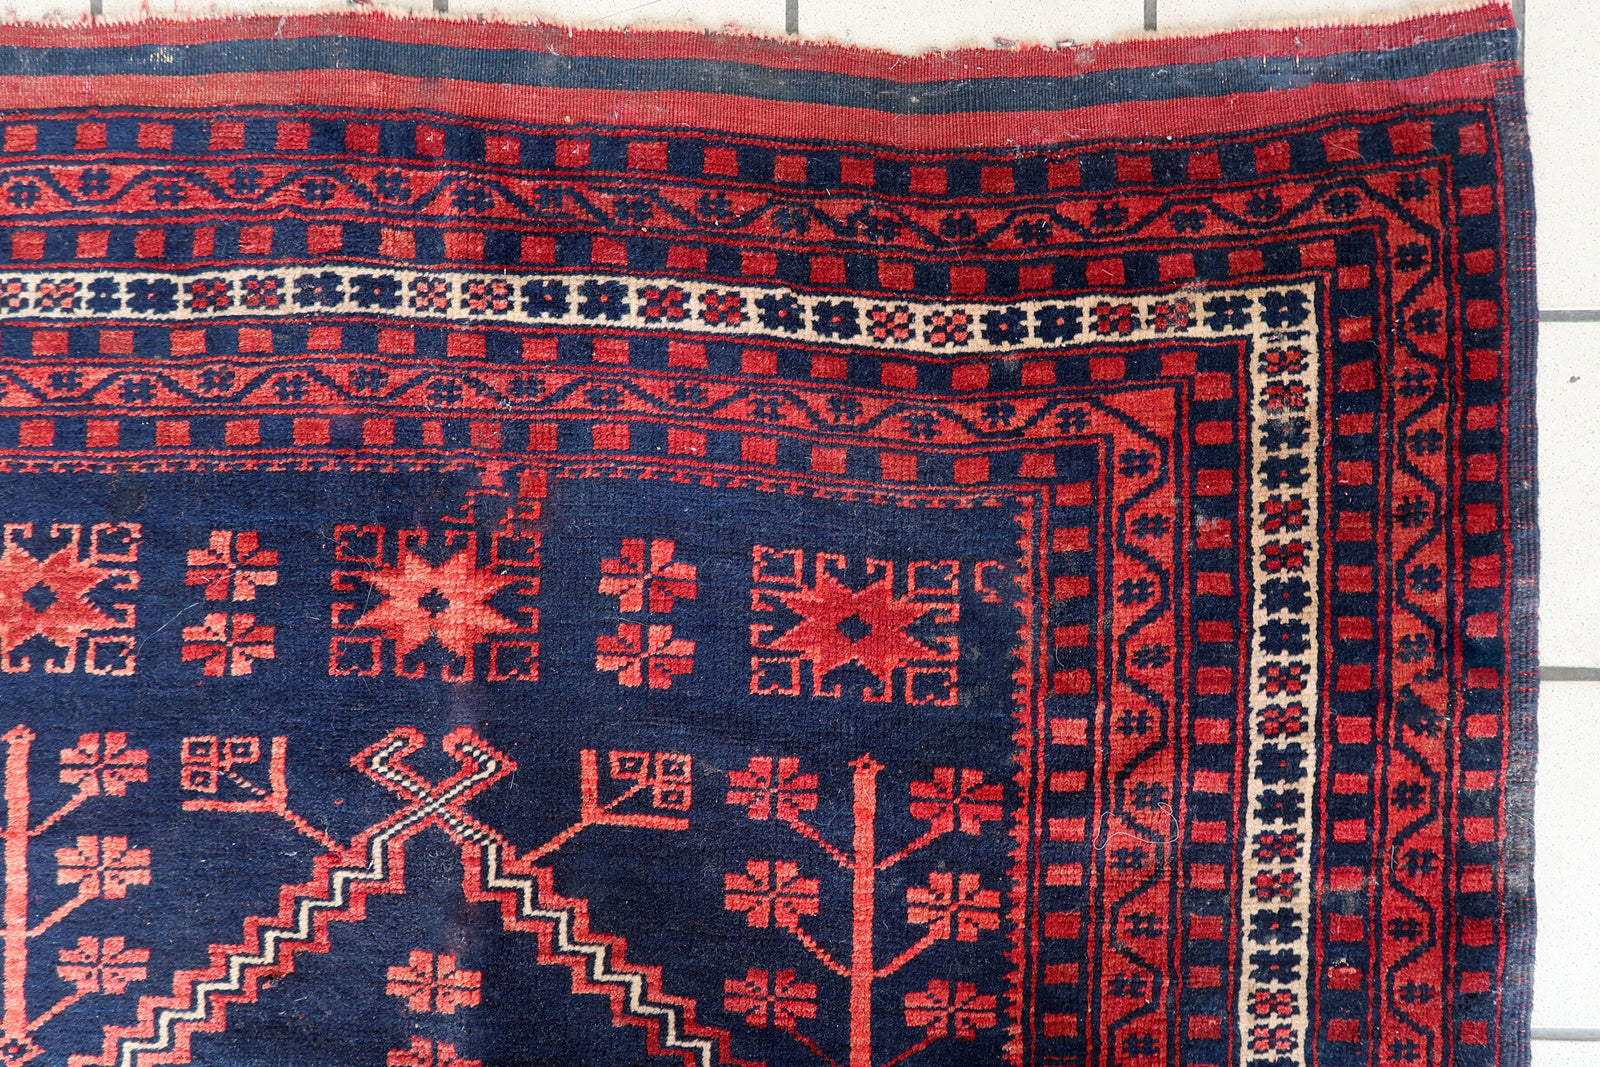 Close-up of Karabagh Rug Corner - Navy Blue and Red Wool Threads